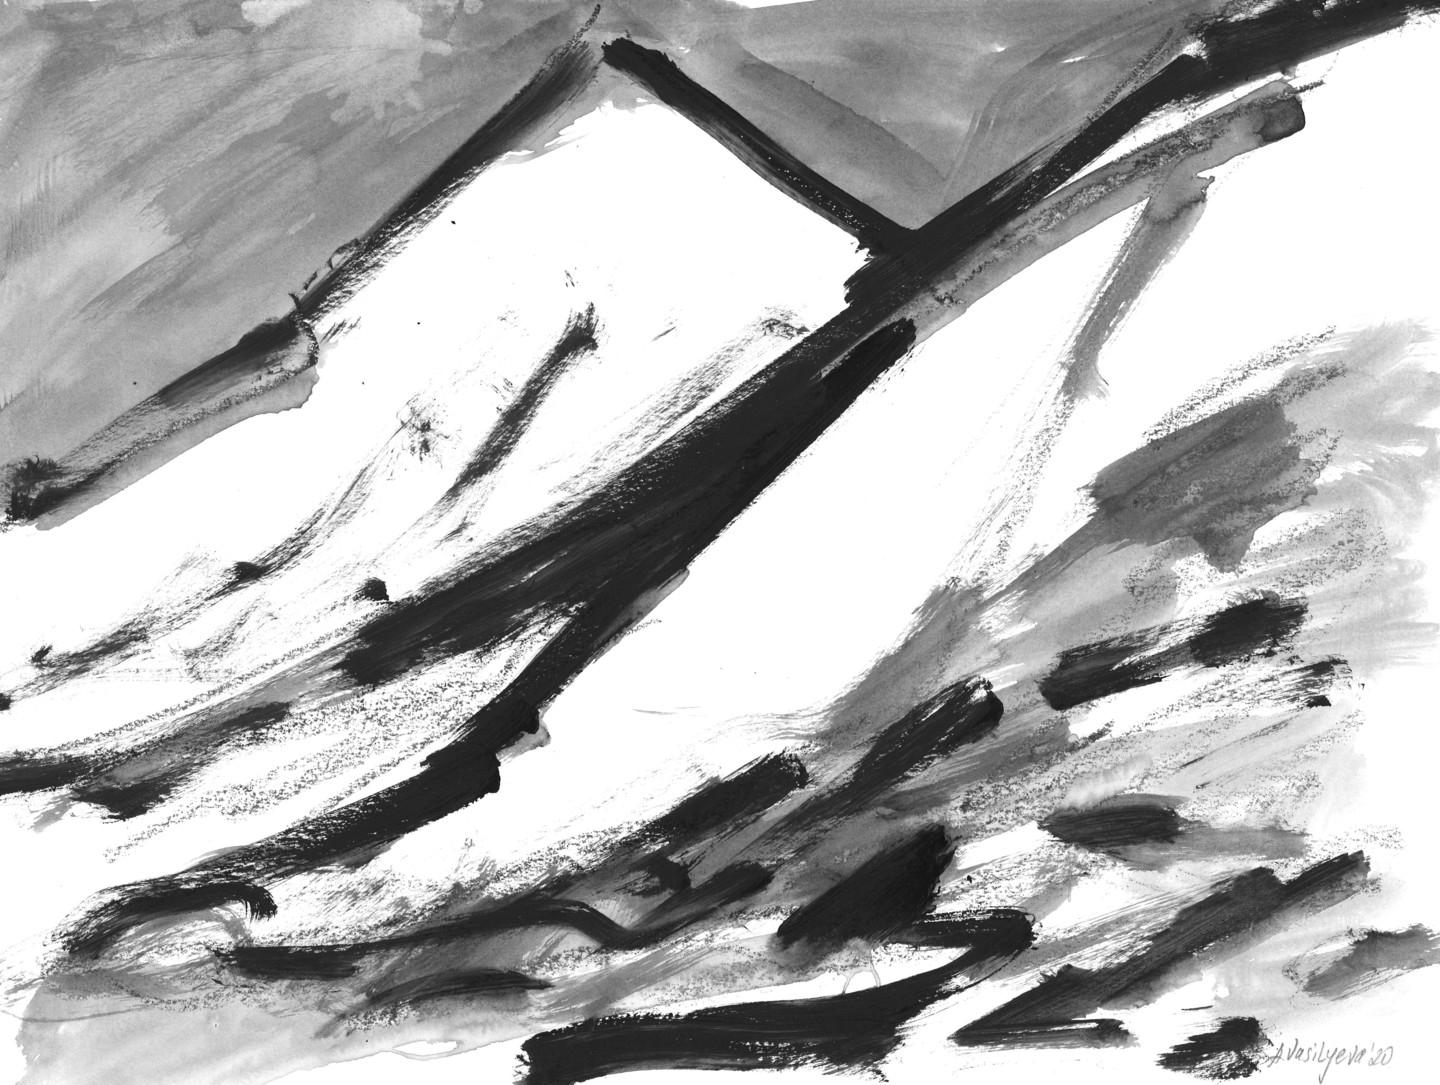 Anastasia Vasilyeva - Mountains 004 (2020)

Abstract landscape, painting in black, grey, white colors. Artwork represents Alps in winter, covered with snow and mist above it. Painting was made with mixed media, acrylic and watercolor on paper in